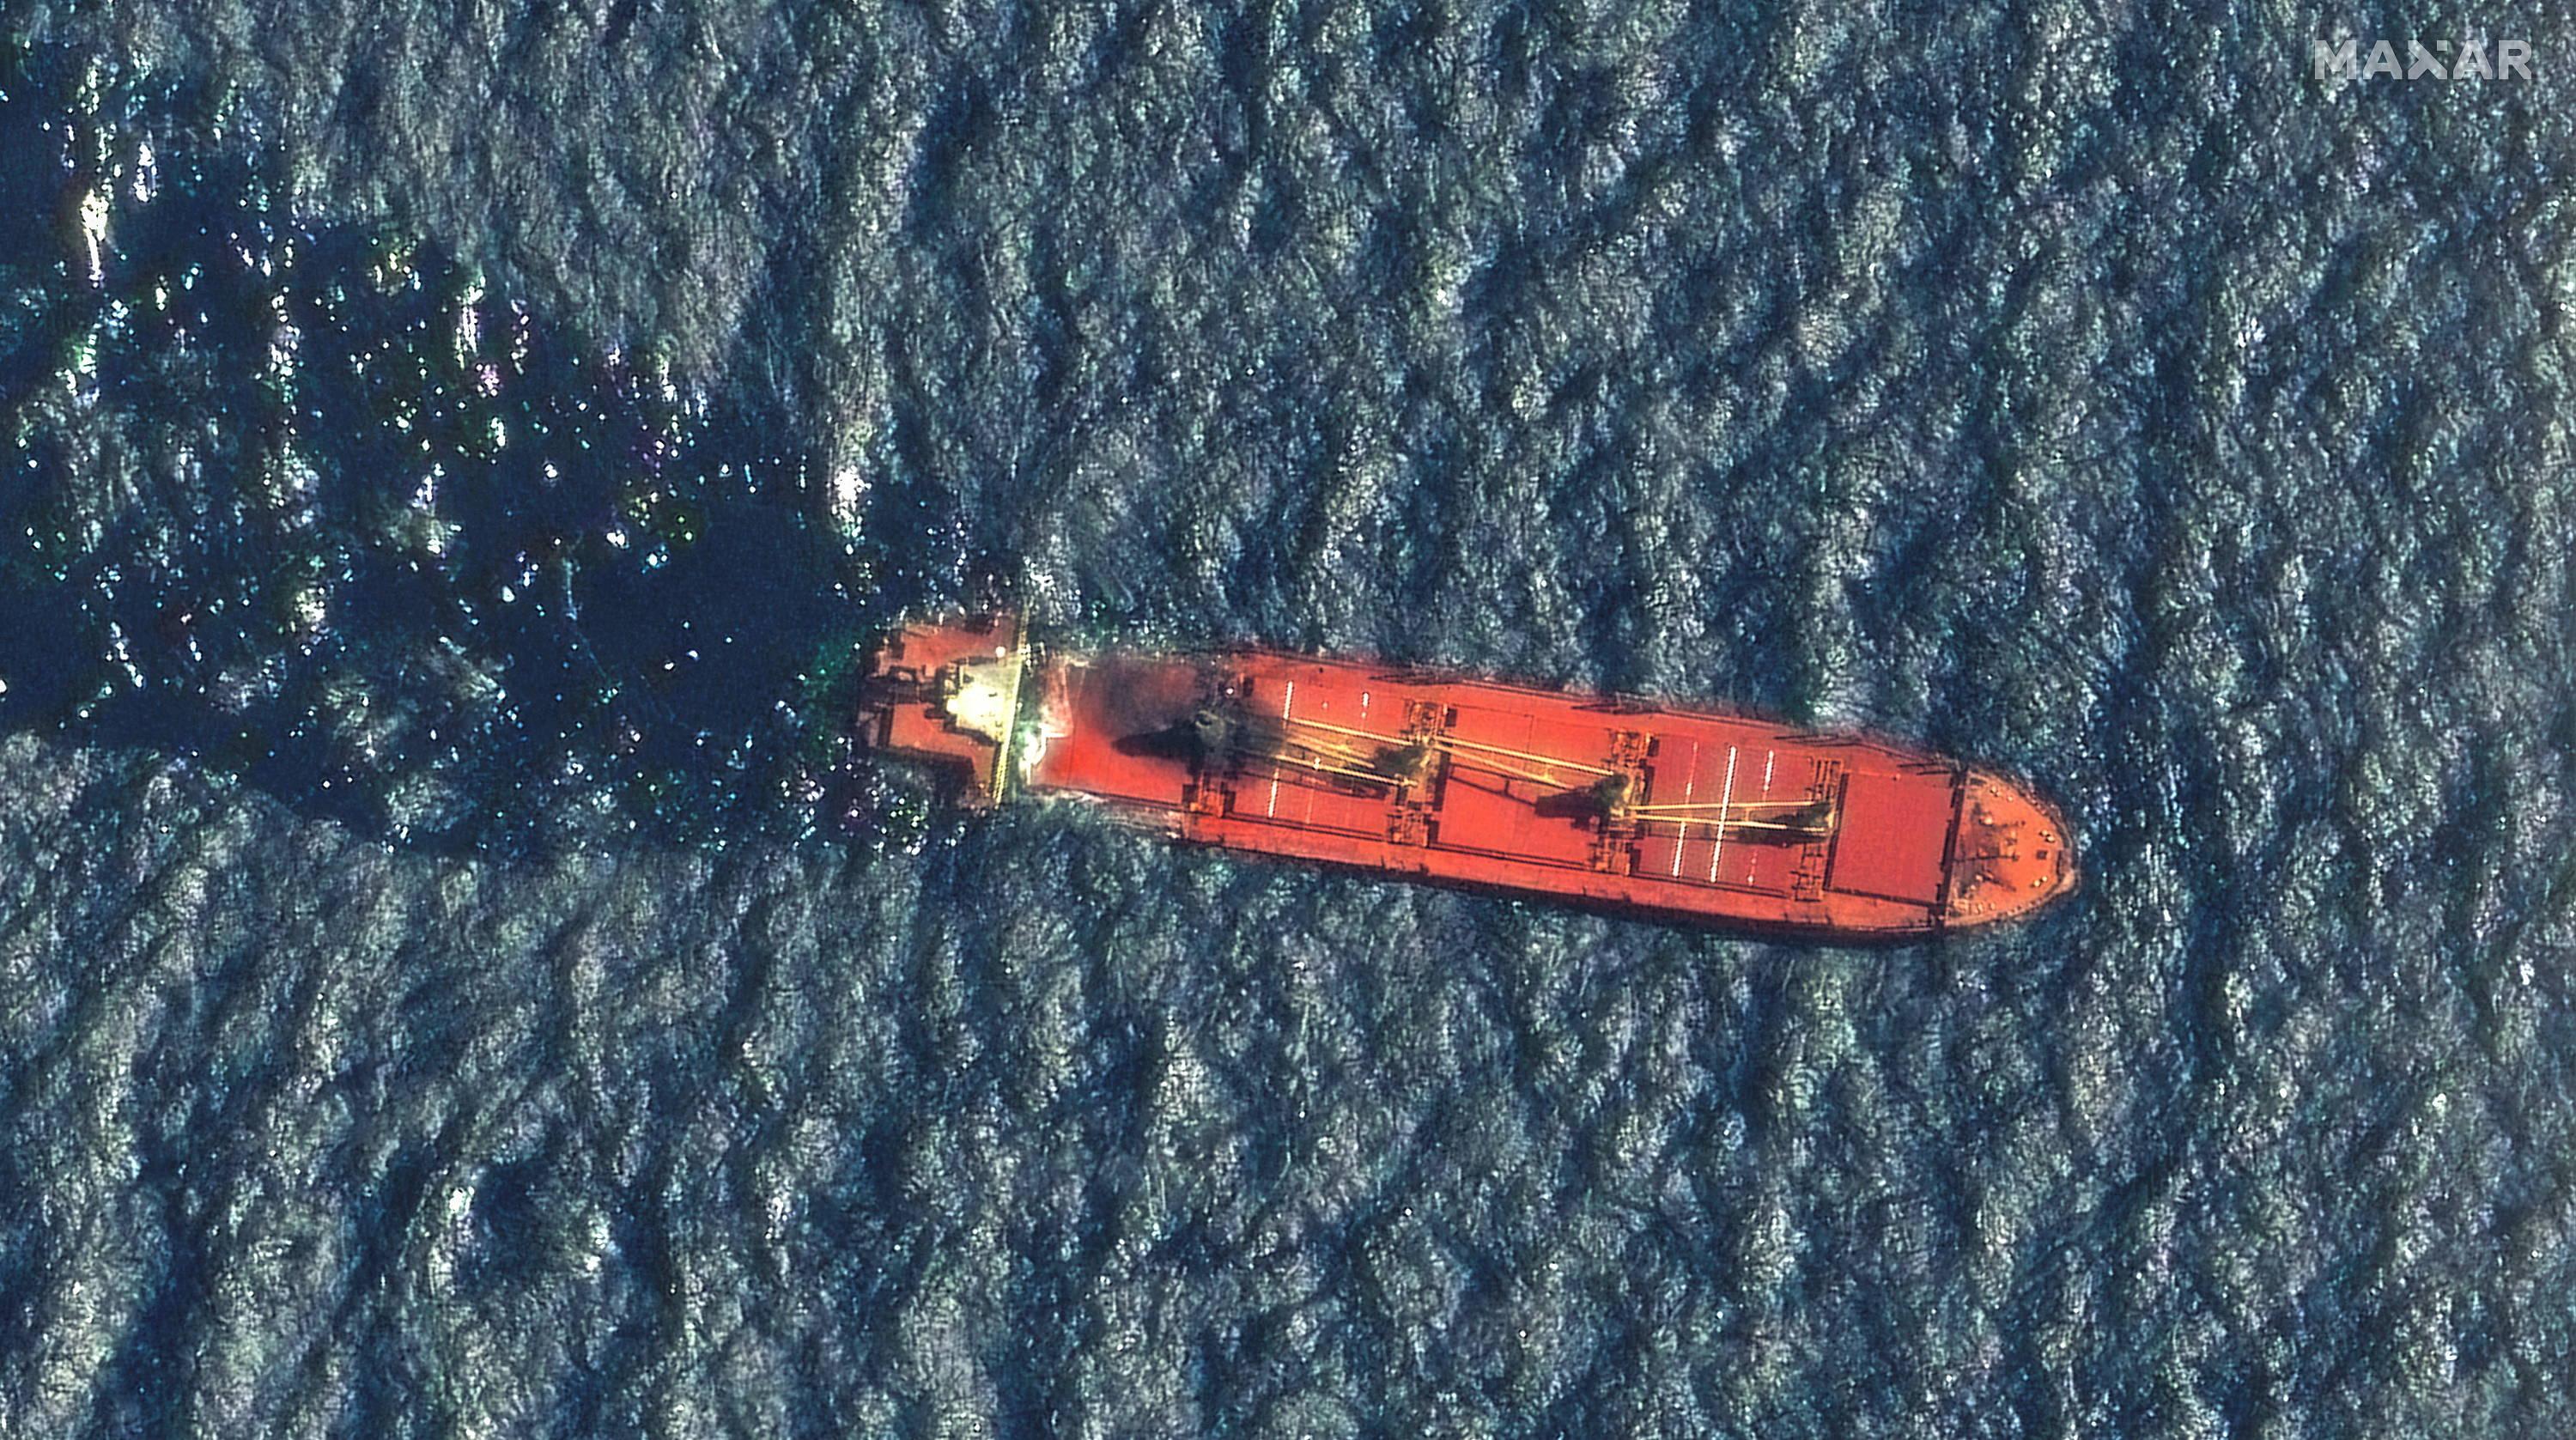 “A strong risk for the environment”: the cargo ship sunk by the Houthis contained 21,000 tonnes of fertilizer